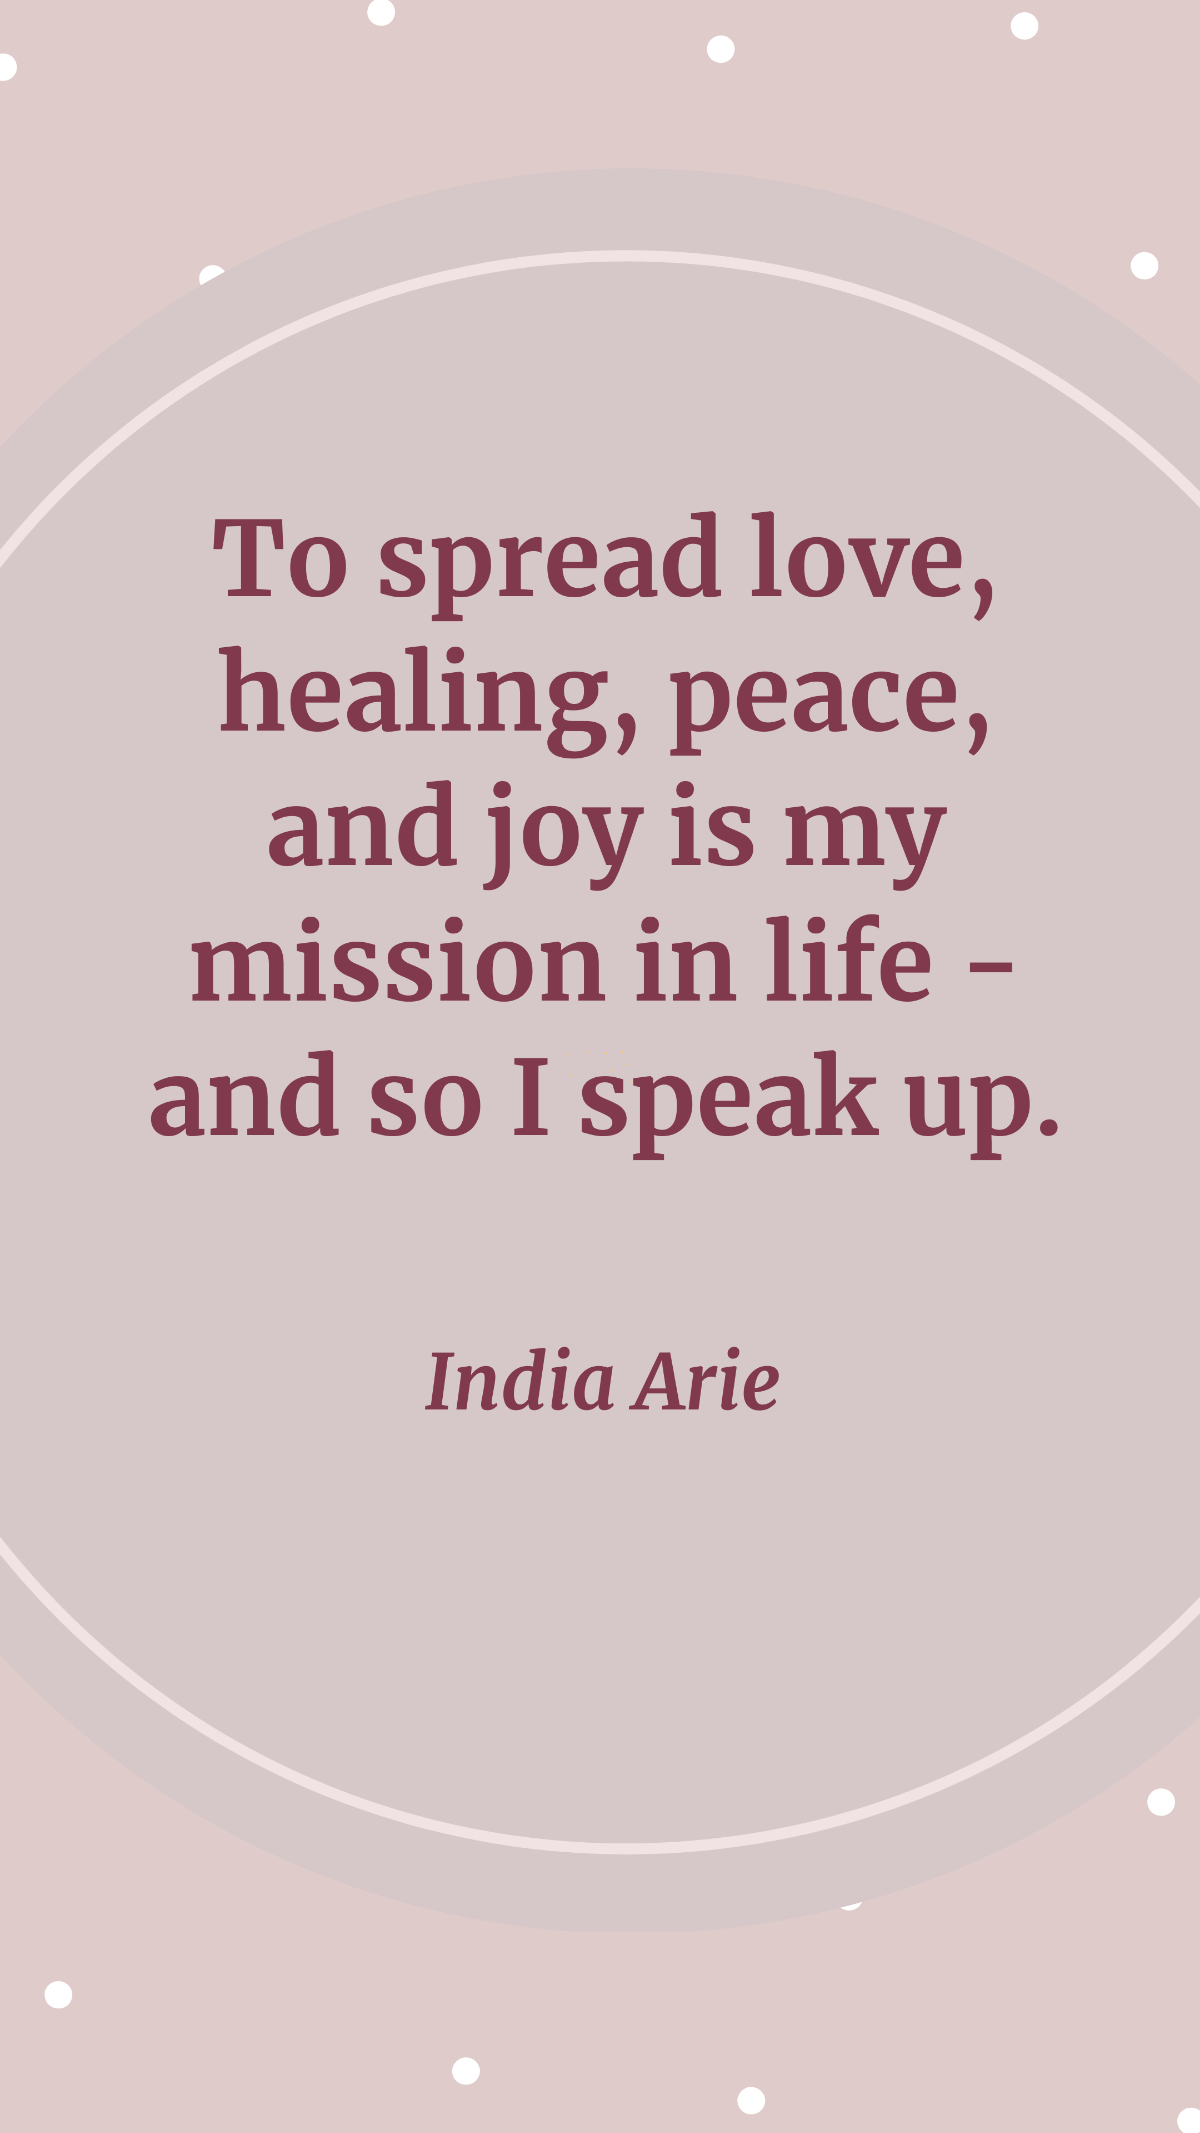 India Arie - To spread love, healing, peace, and joy is my mission in life - and so I speak up. Template